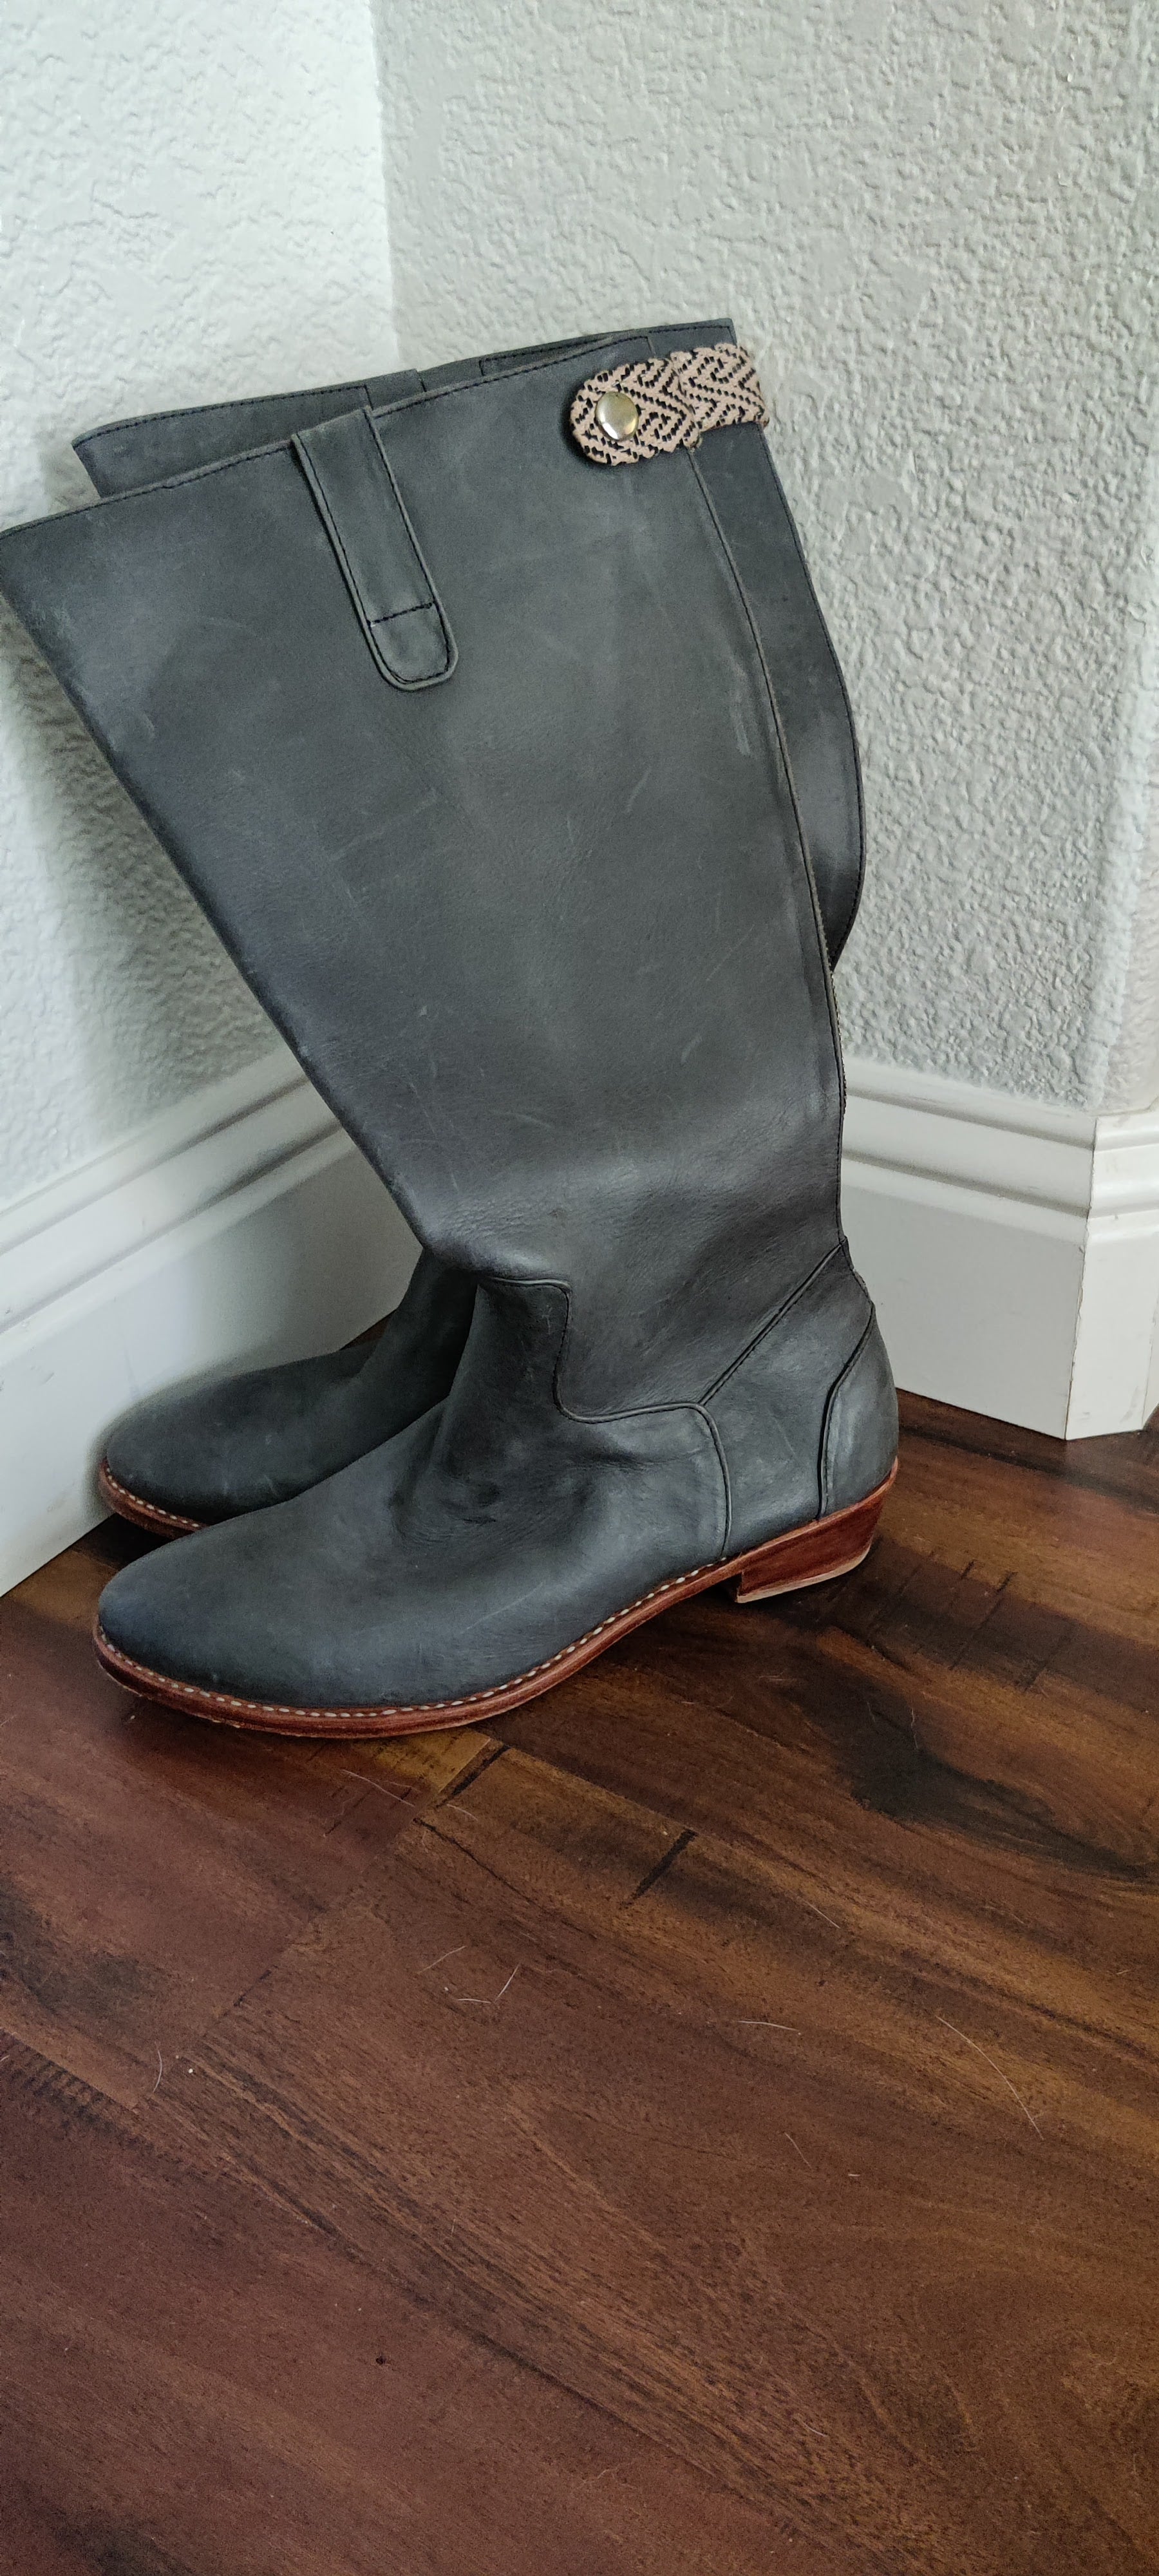 Ariana in Charcoal size 11 - Pre-loved